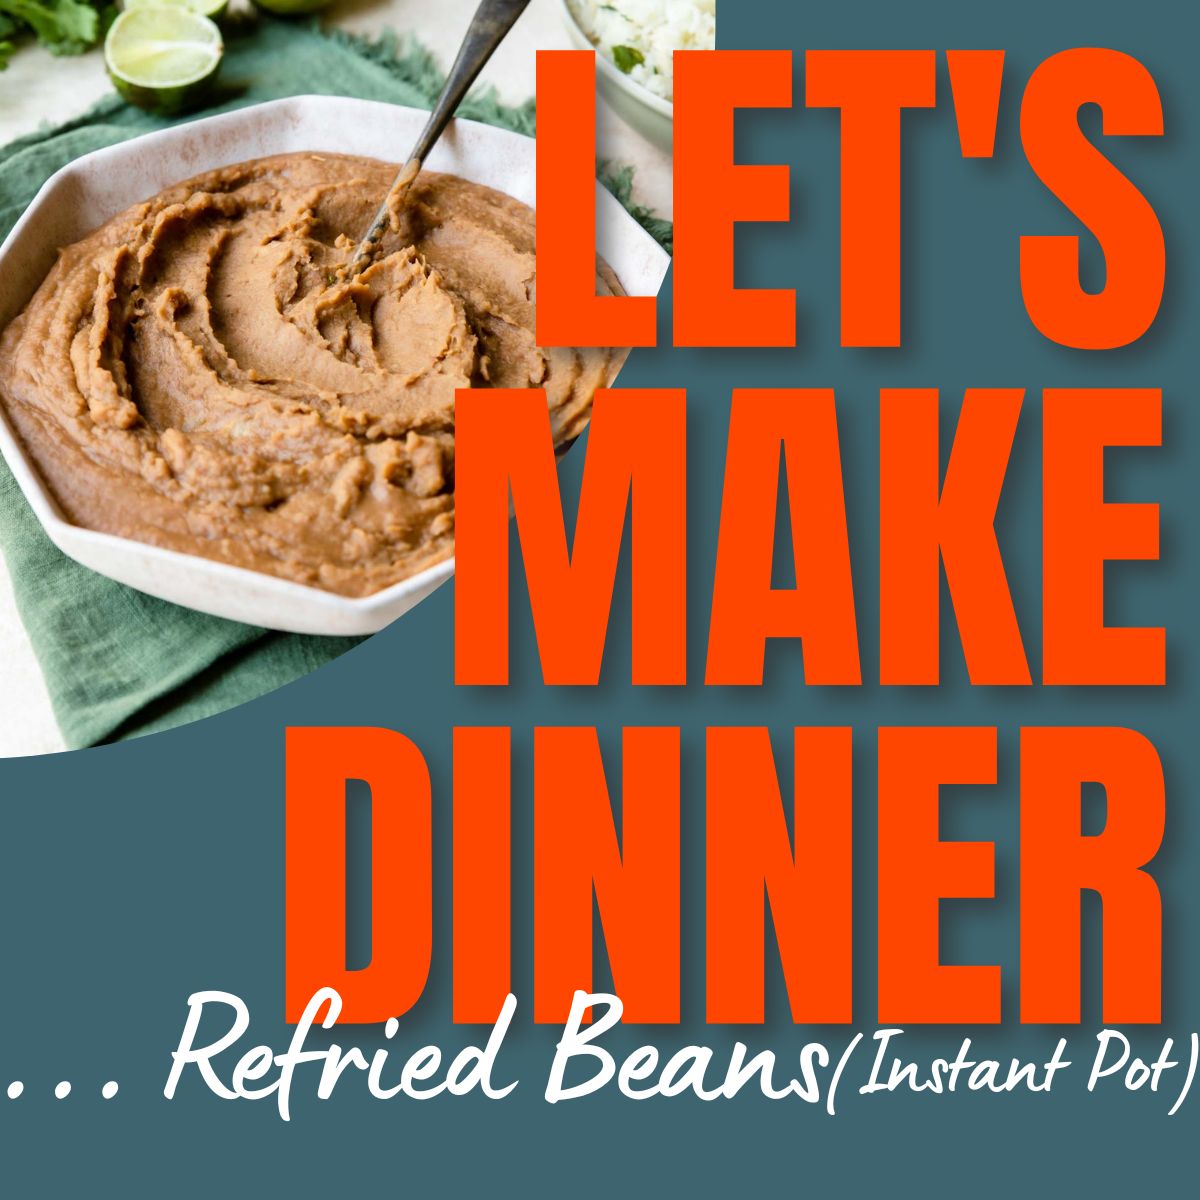 Let's Make Dinner text with a picture of refried beans in a bowl